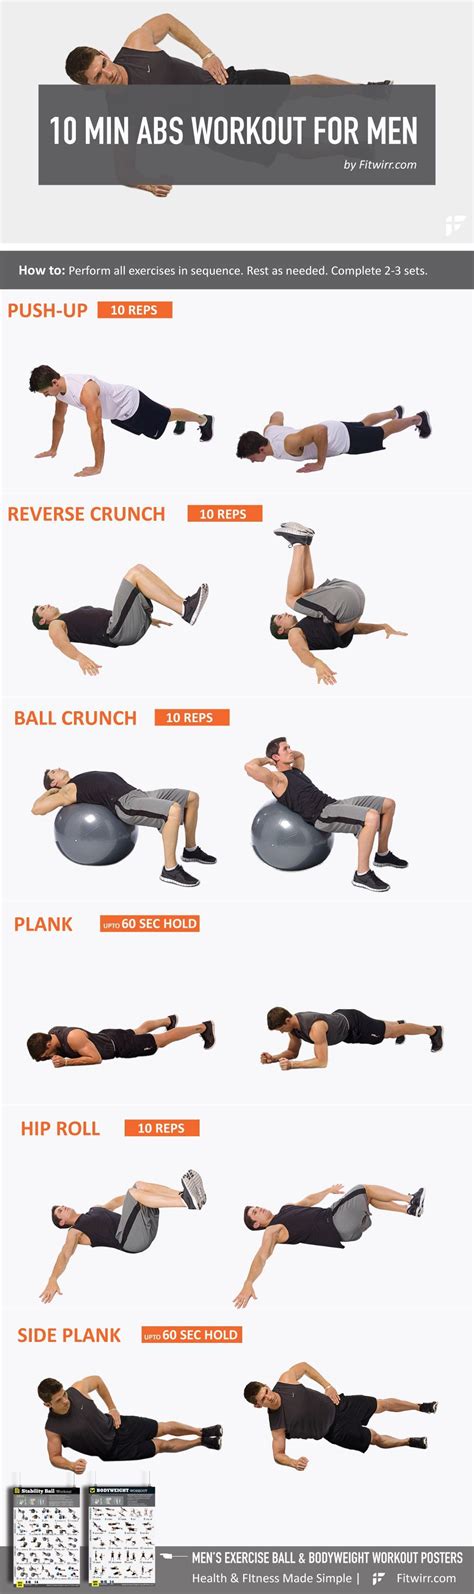 10 Minute Abs Workout For Men Ab Workout Men 10 Minute Ab Workout